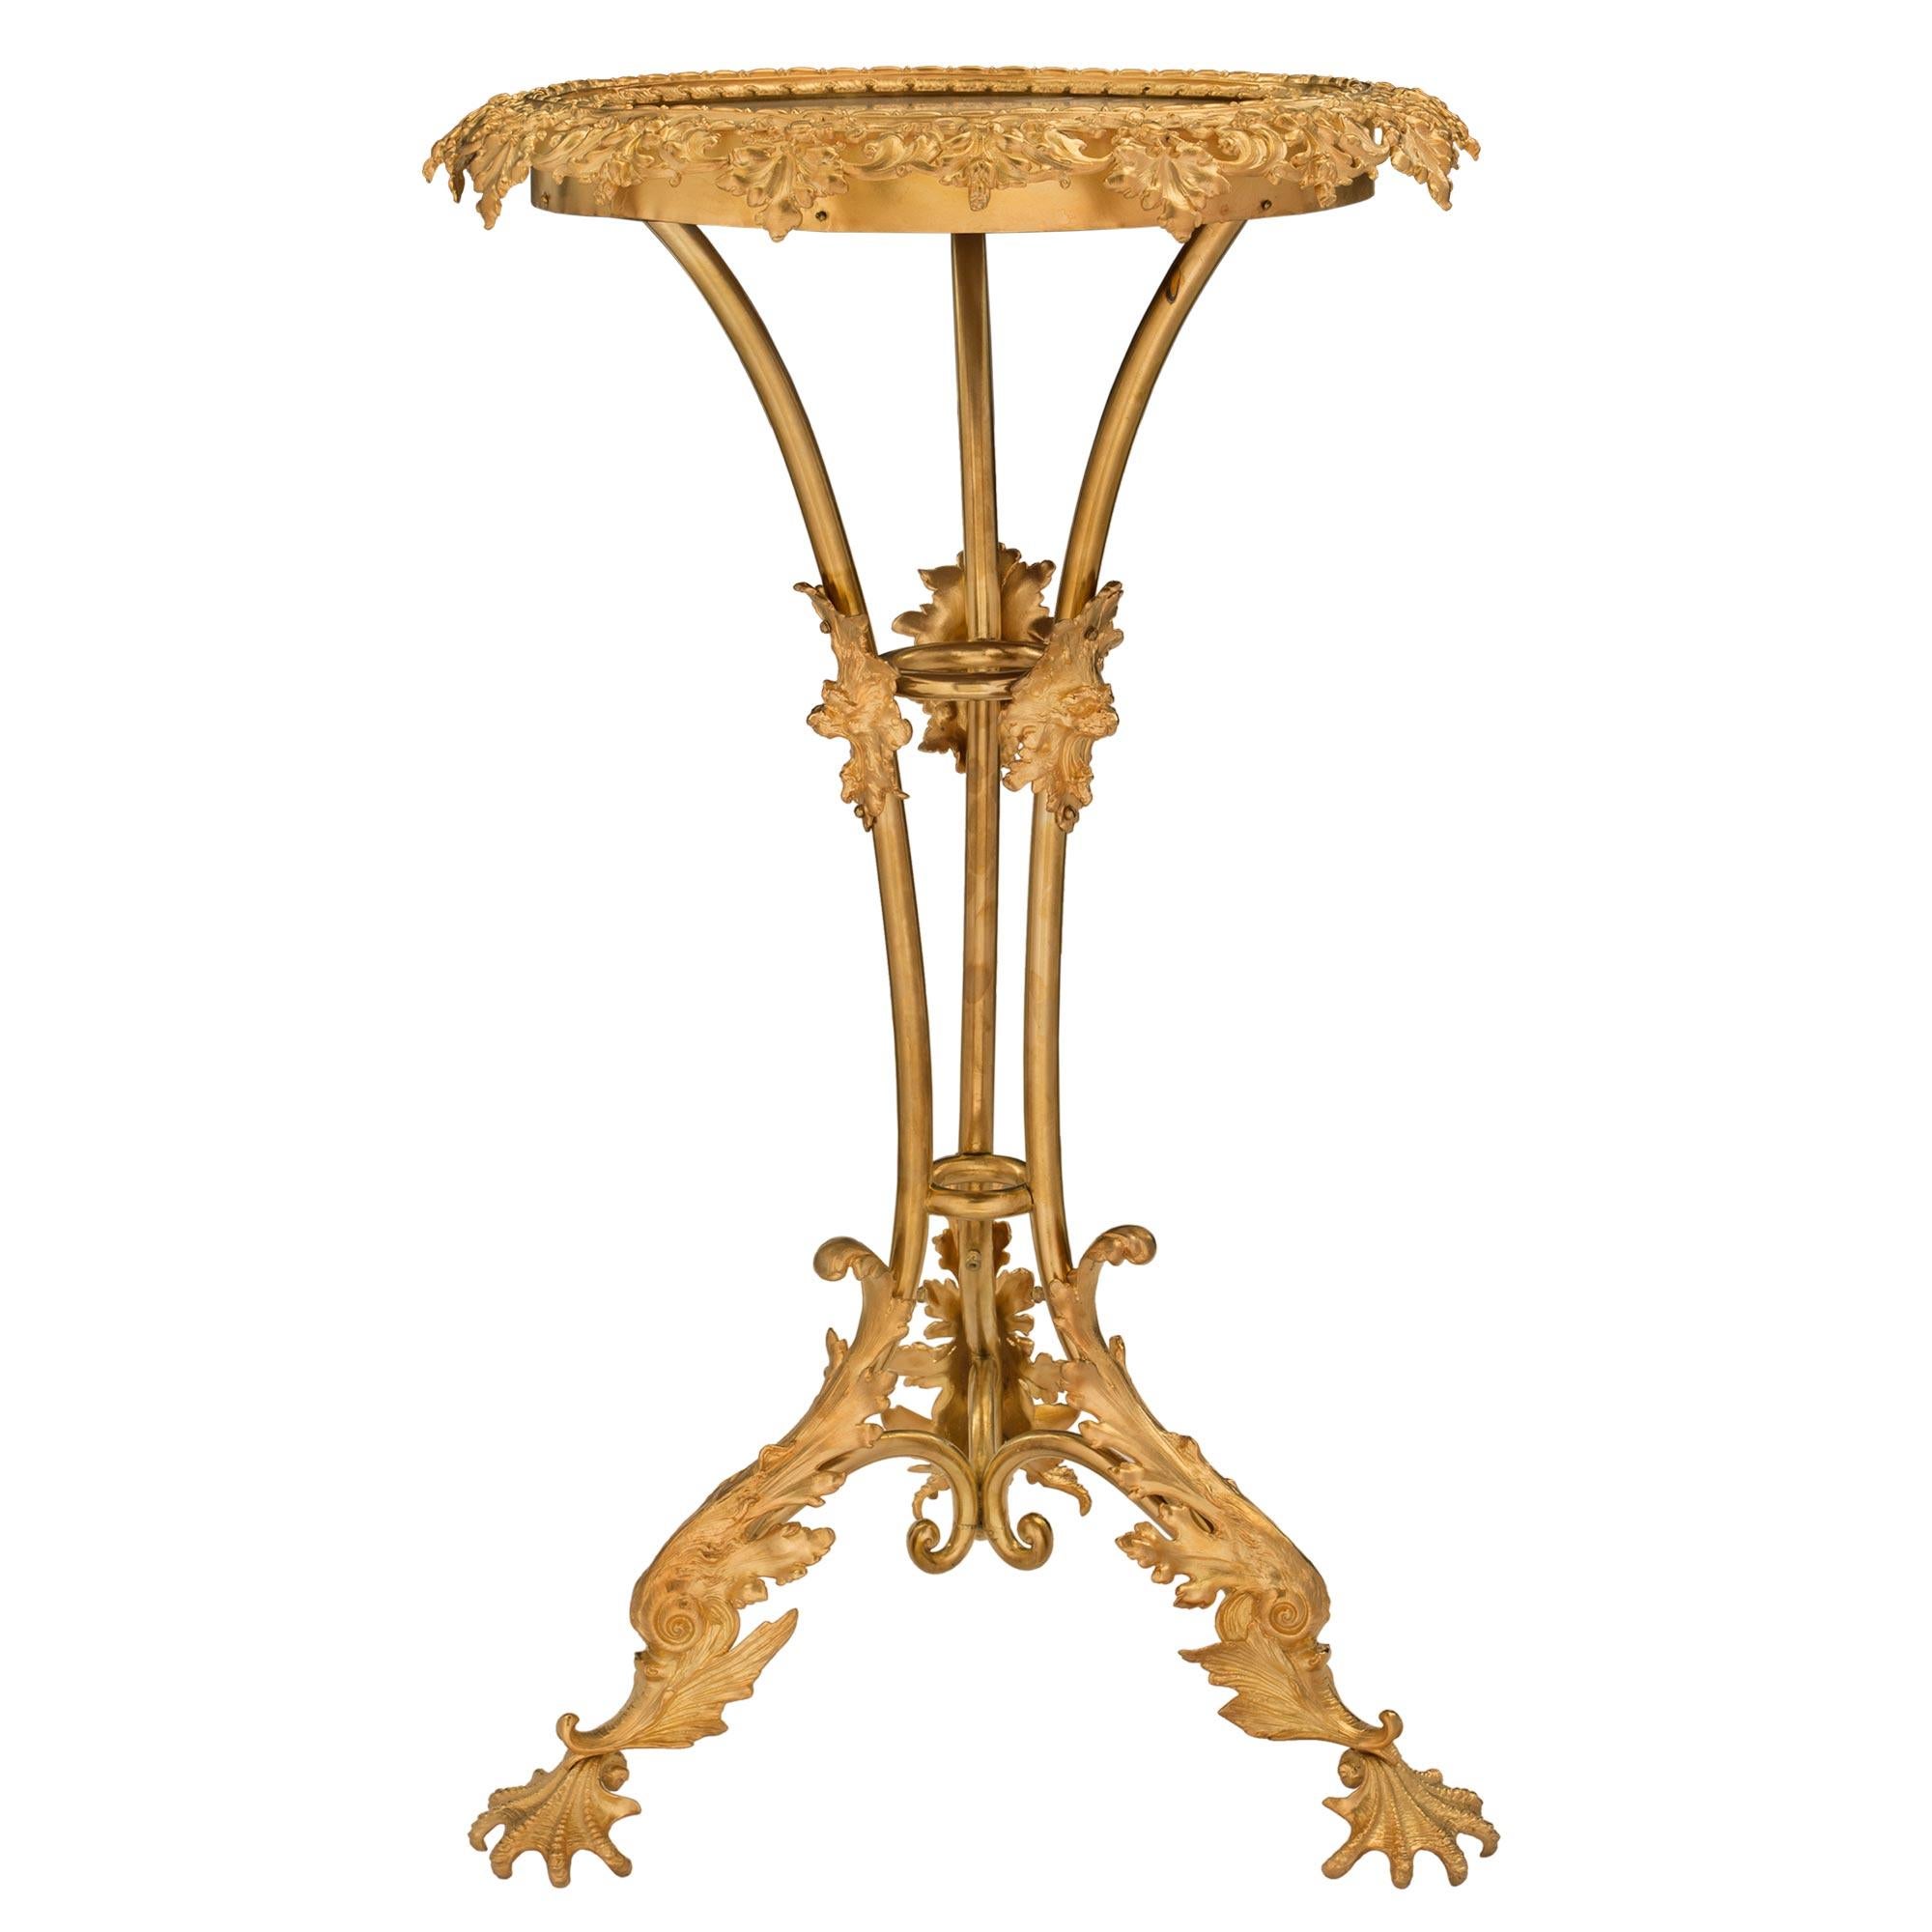 A beautiful Italian 19th century Napoleon III Period ormolu and onyx side table. The table is raised by most unique and extremely decorative foliate feet with beautiful movements and finely chased details. The elegantly curved three central supports